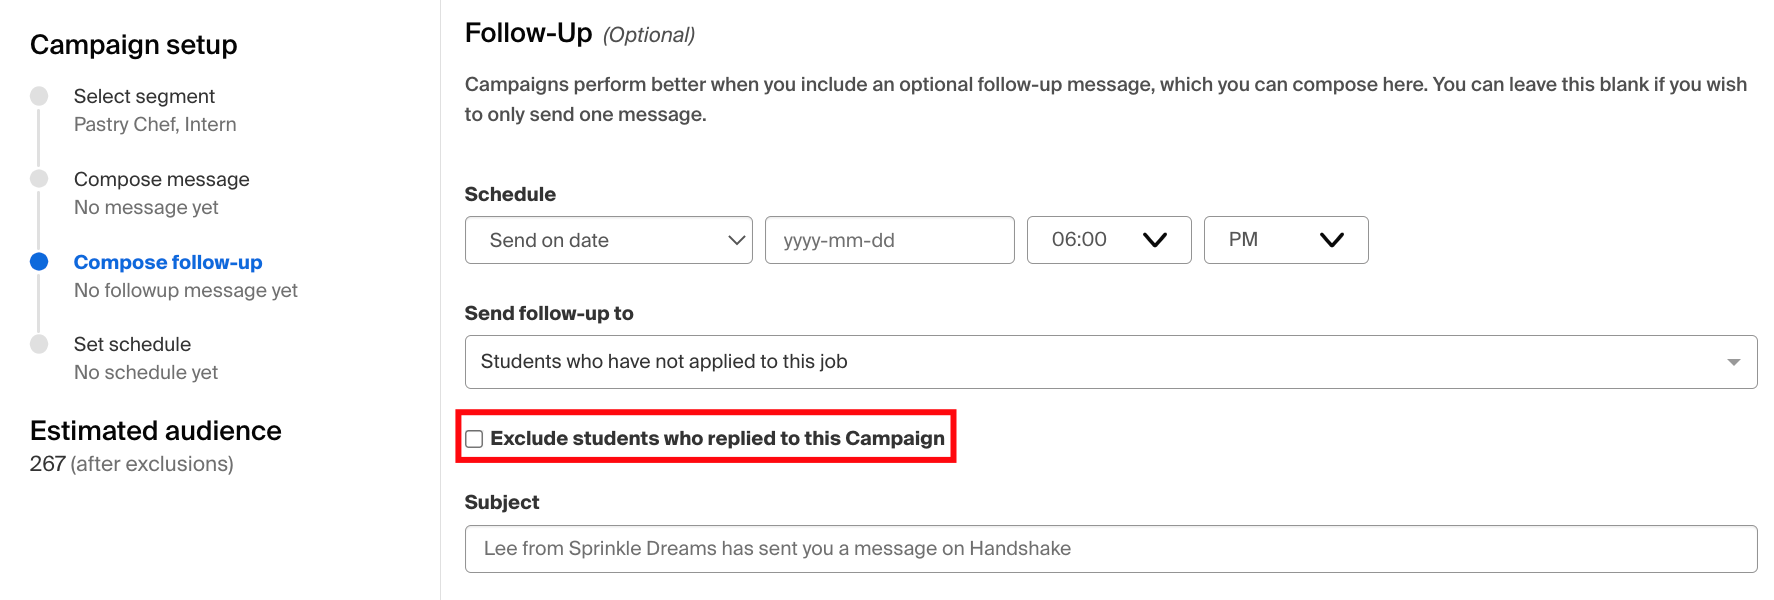 Exclude students who replied to this campaign.png